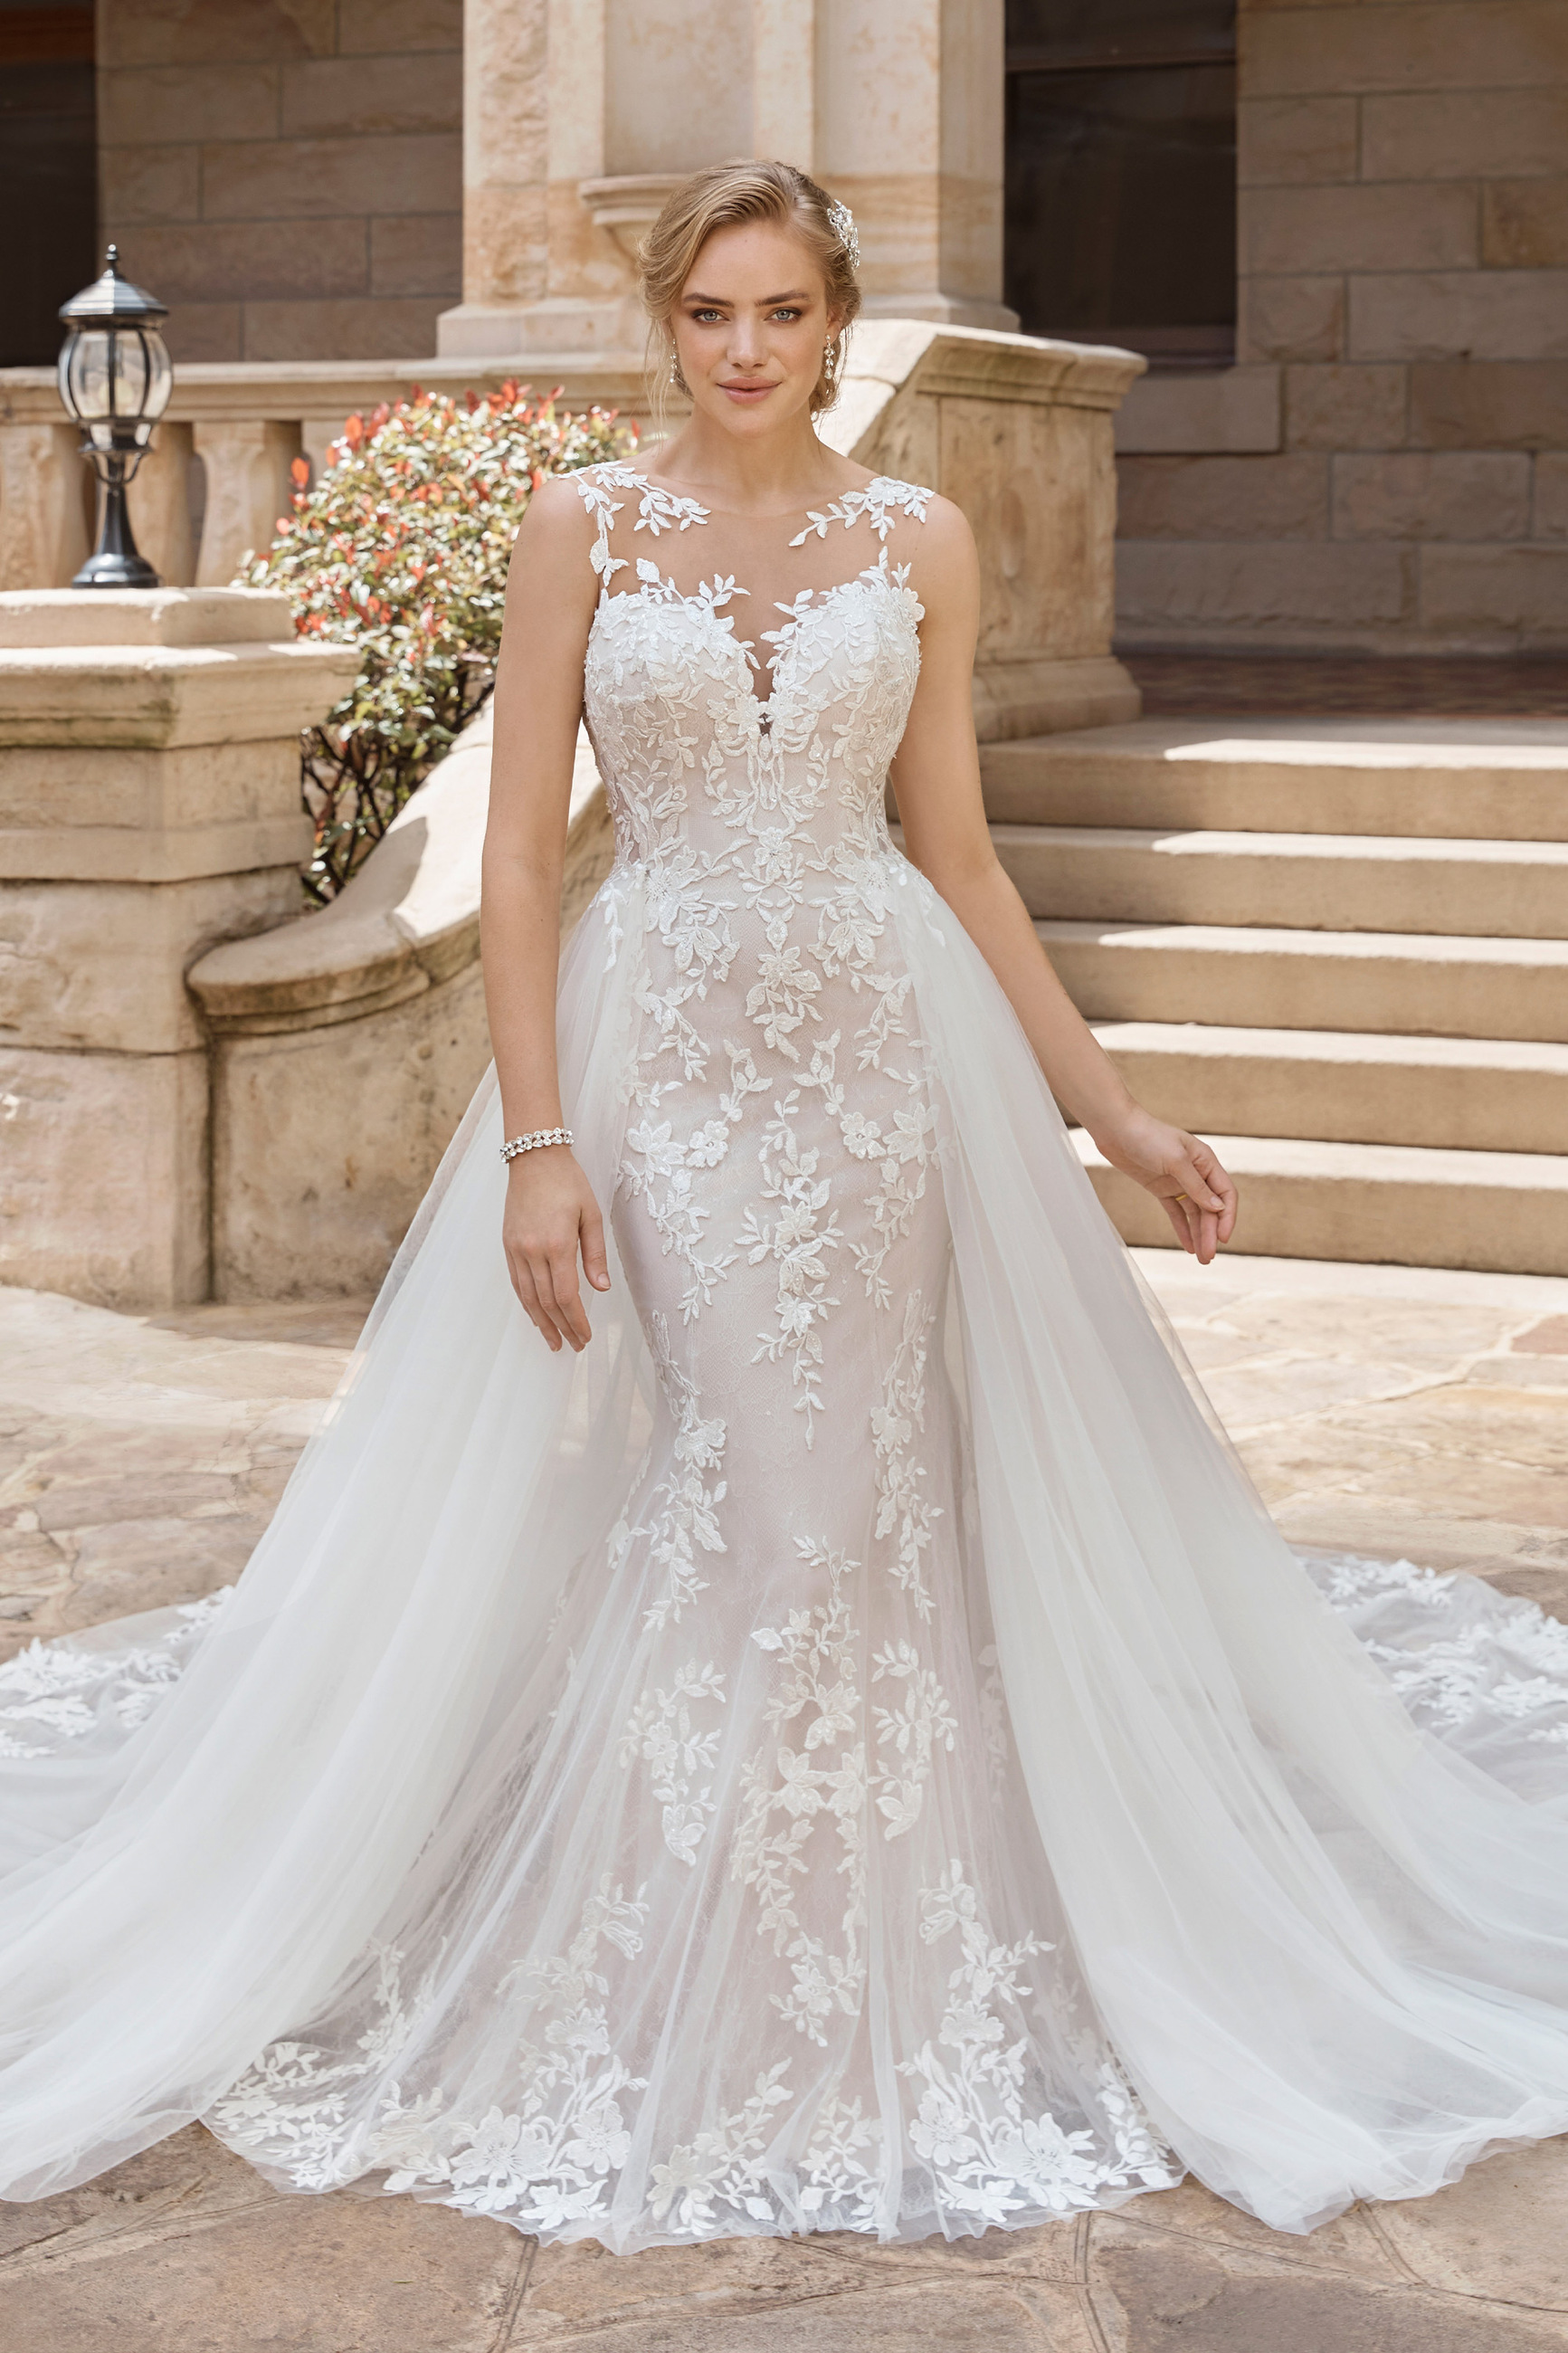 Sweetheart Lace Wedding Dresses A-line Bridal Ball Gowns 6 8 10 12 14 16 18 20+ 